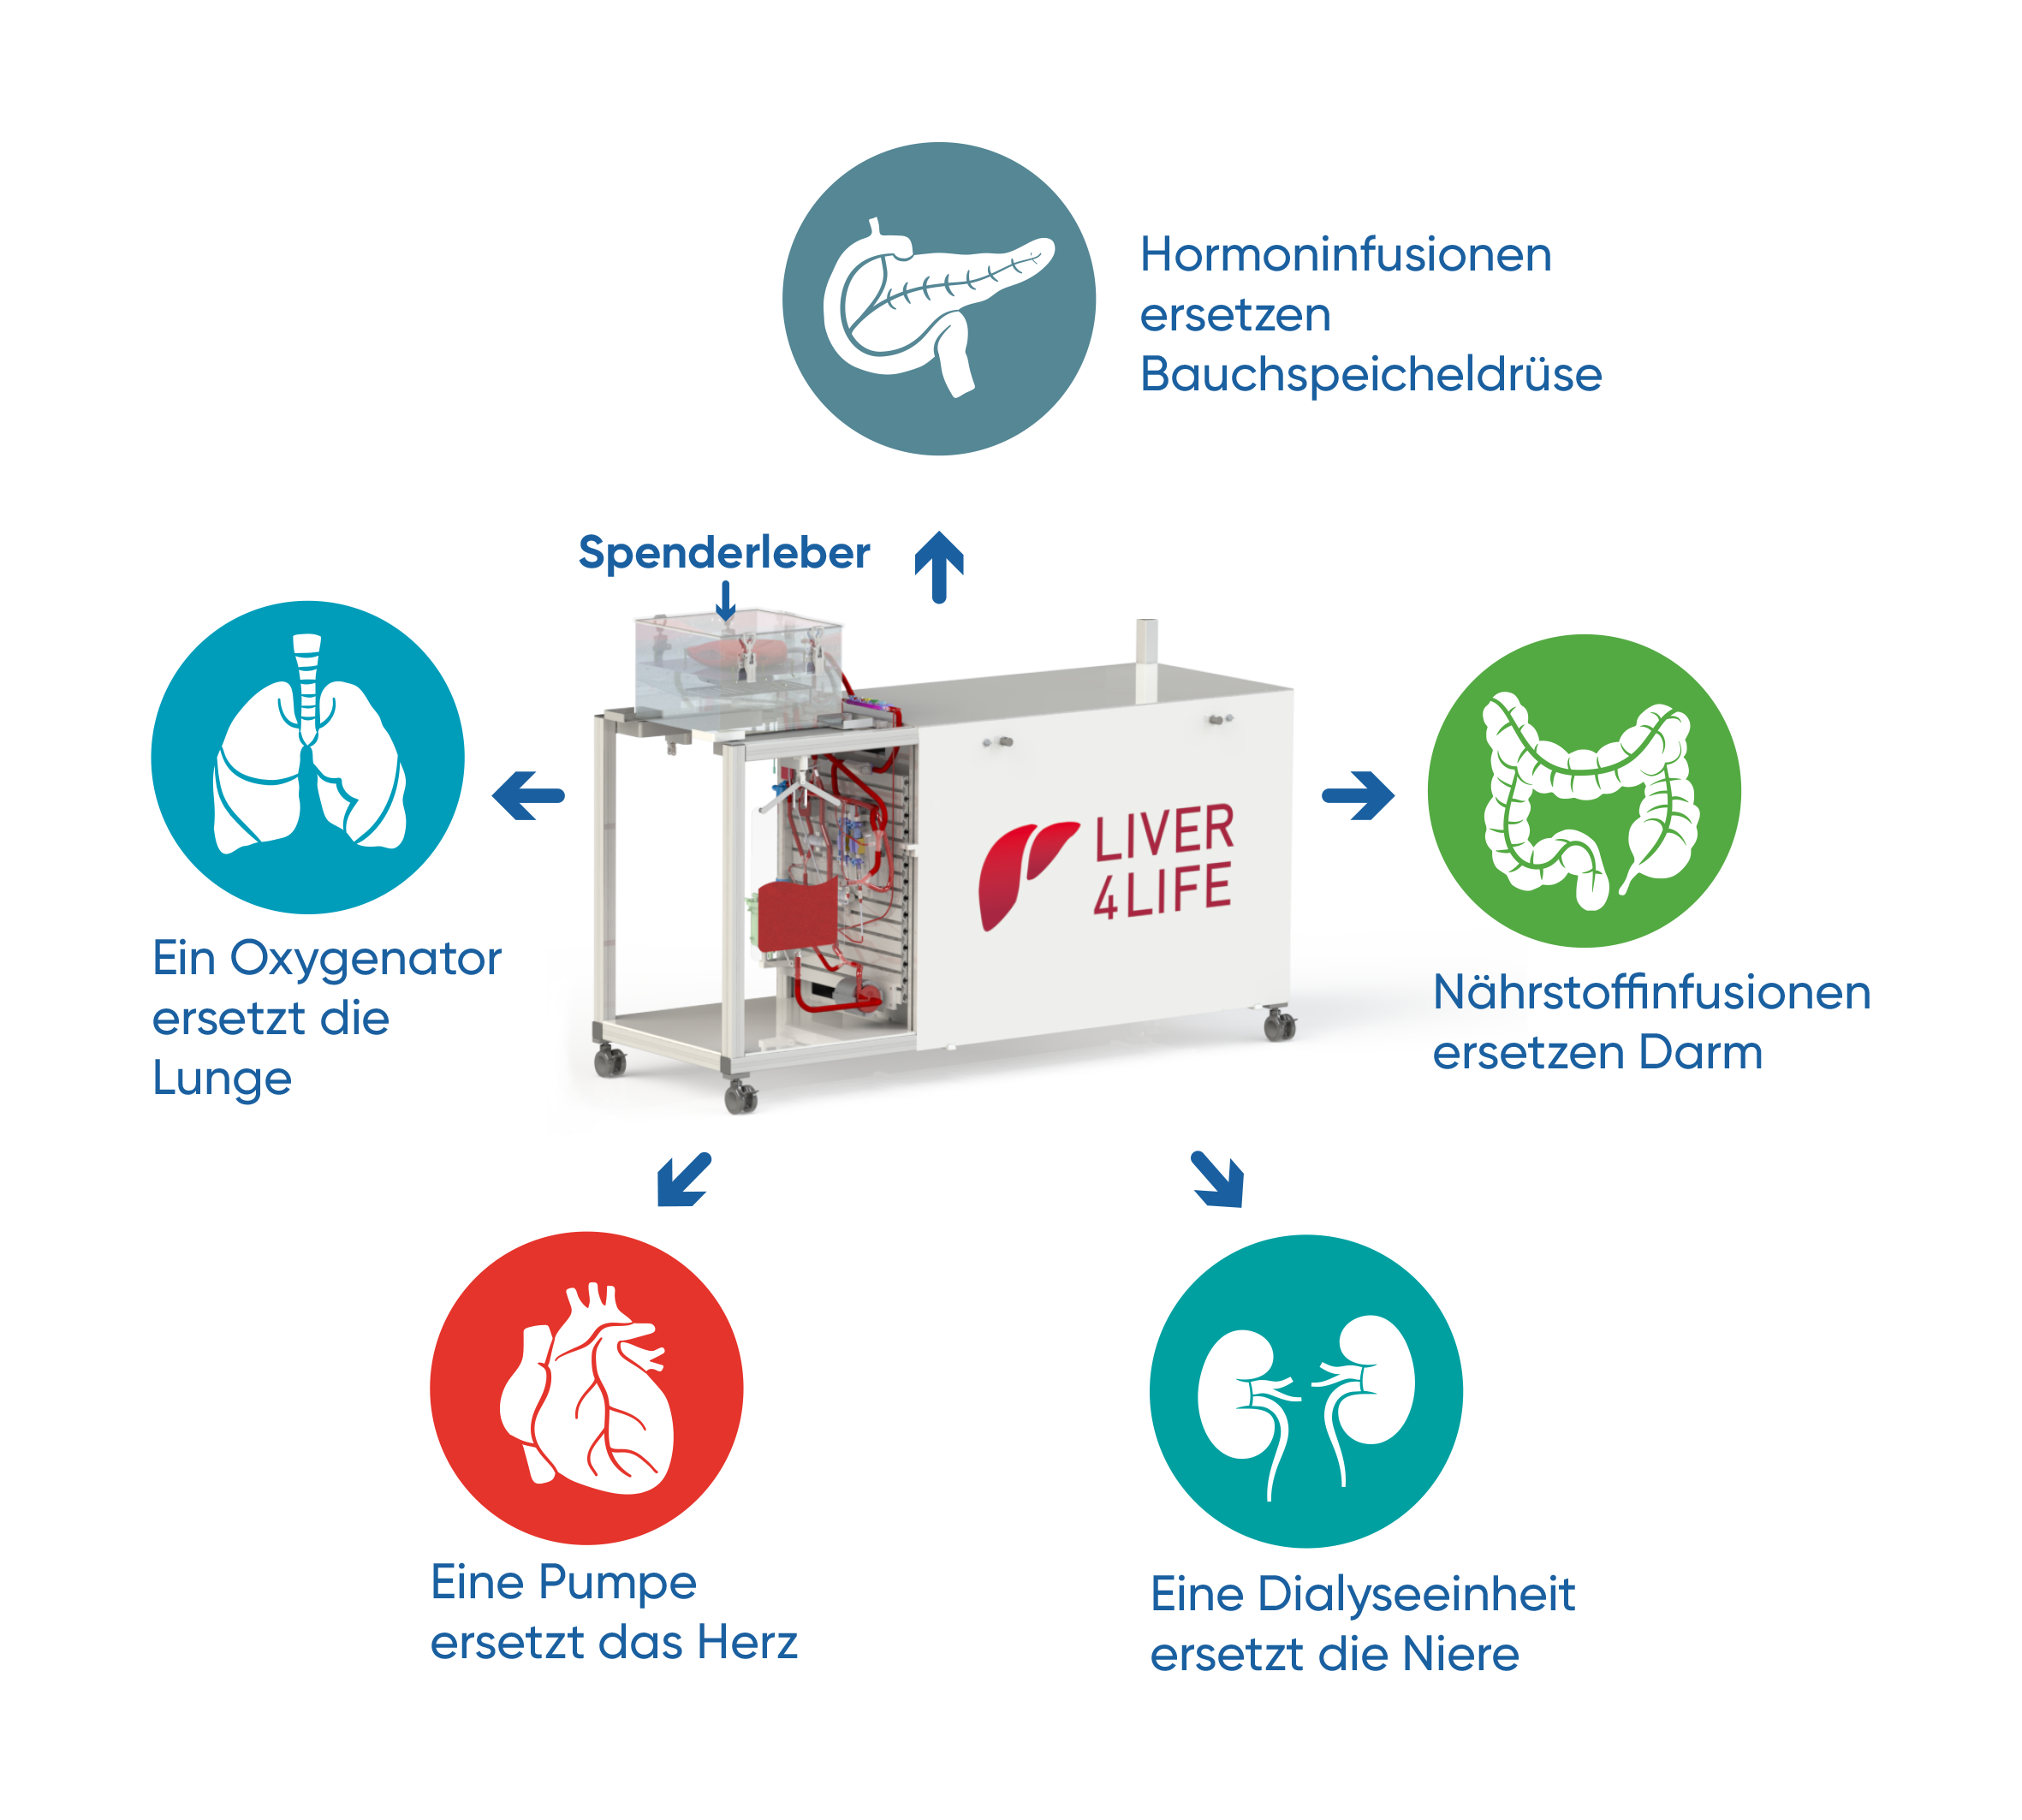 The perfusion machine replaces the functions of various organs in order to keep the donor liver alive outside of the body.